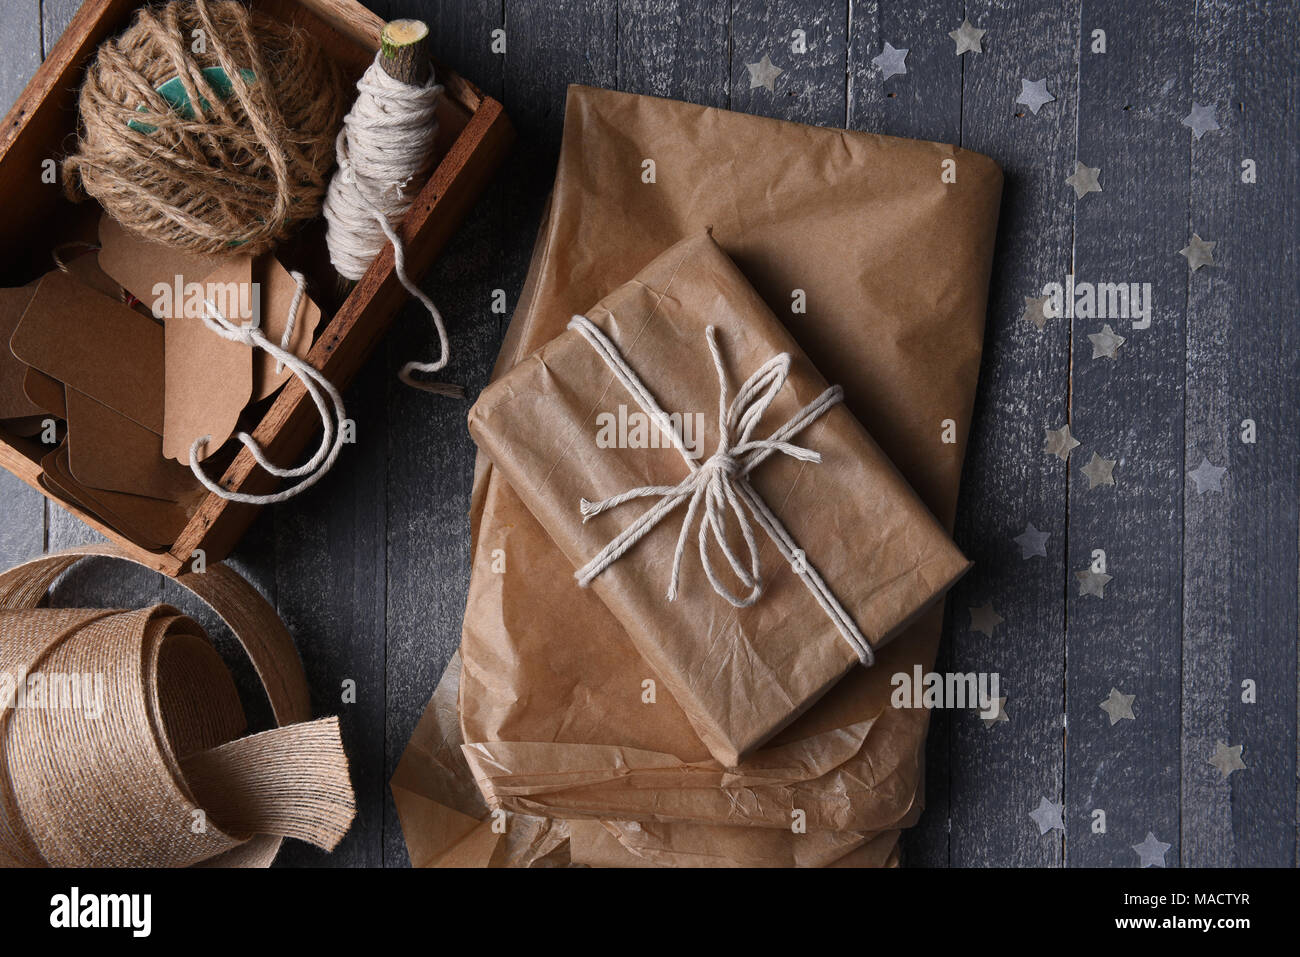 Simple Solid Brown Wrapping Paper - Plain Brown Wrapping Paper